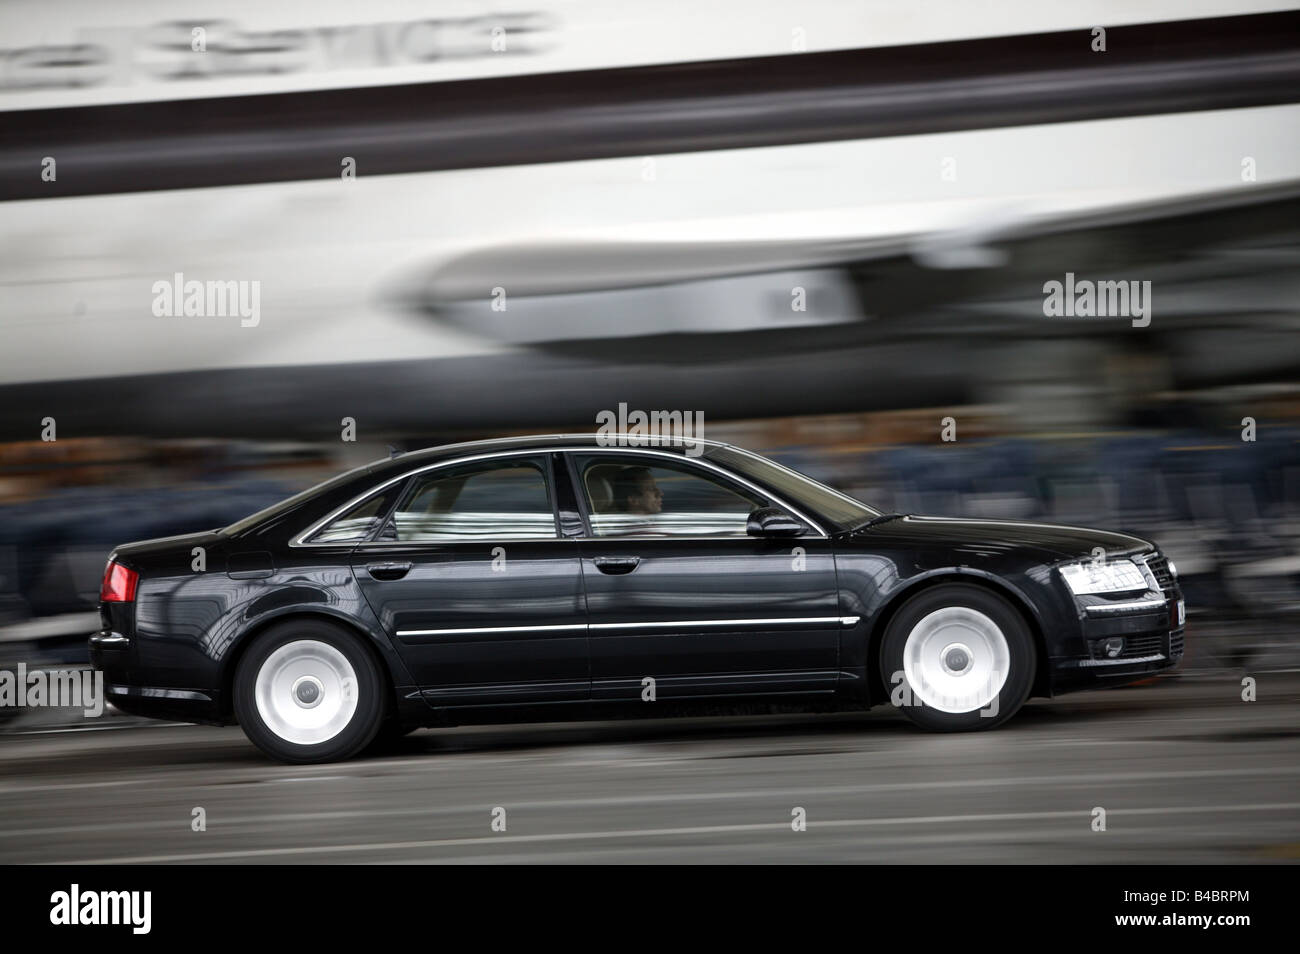 Car, Audi A8 4.2 Quattro, Limousine, Luxury approx.s, model year 2002-, black, V8, driving, side view, photographer: Achim Hartm Stock Photo